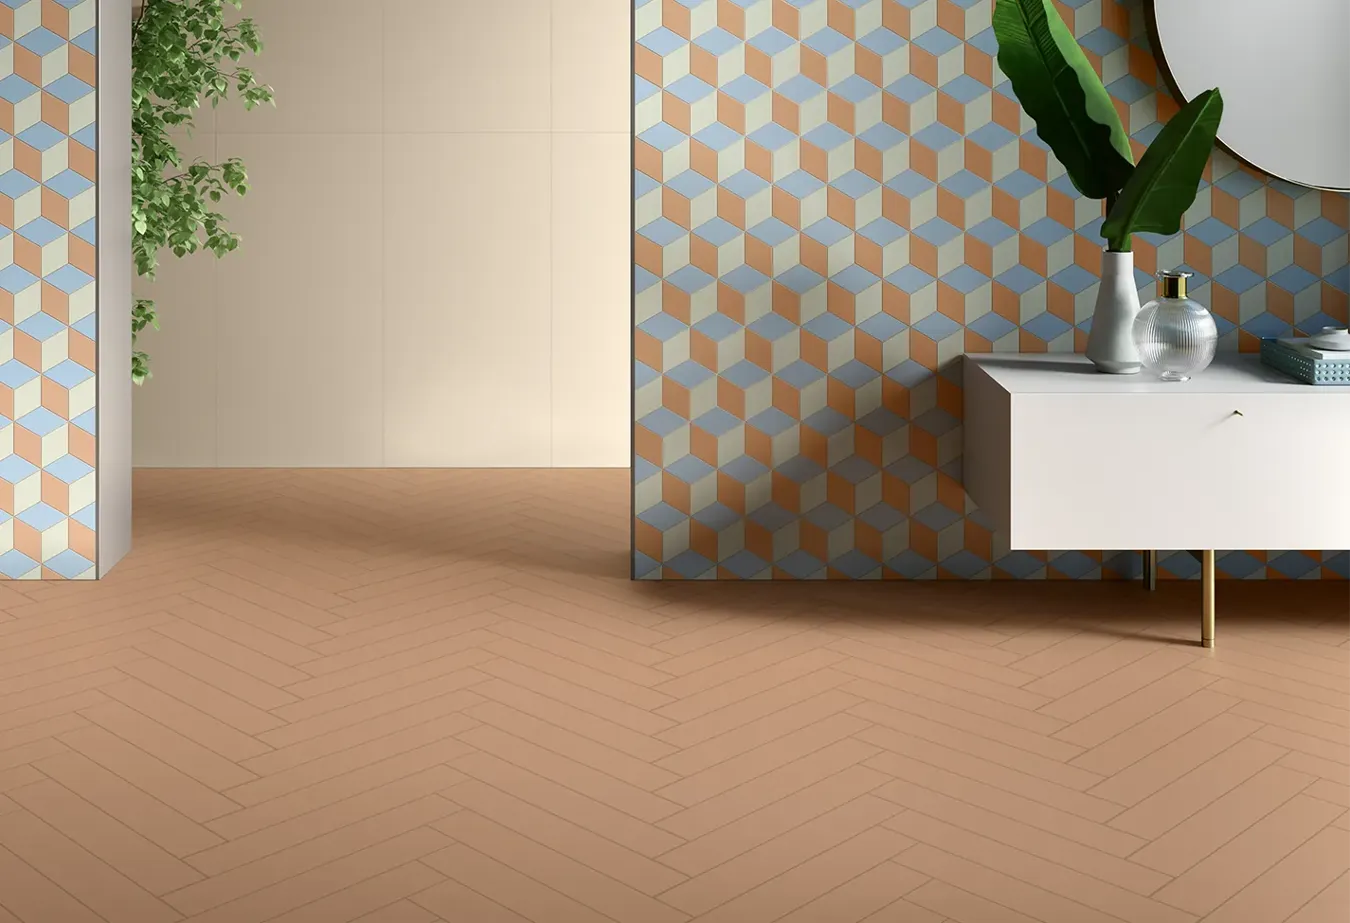 Modern meets nature with terracotta resin-effect tiles from the Elements Design collection on the floor.